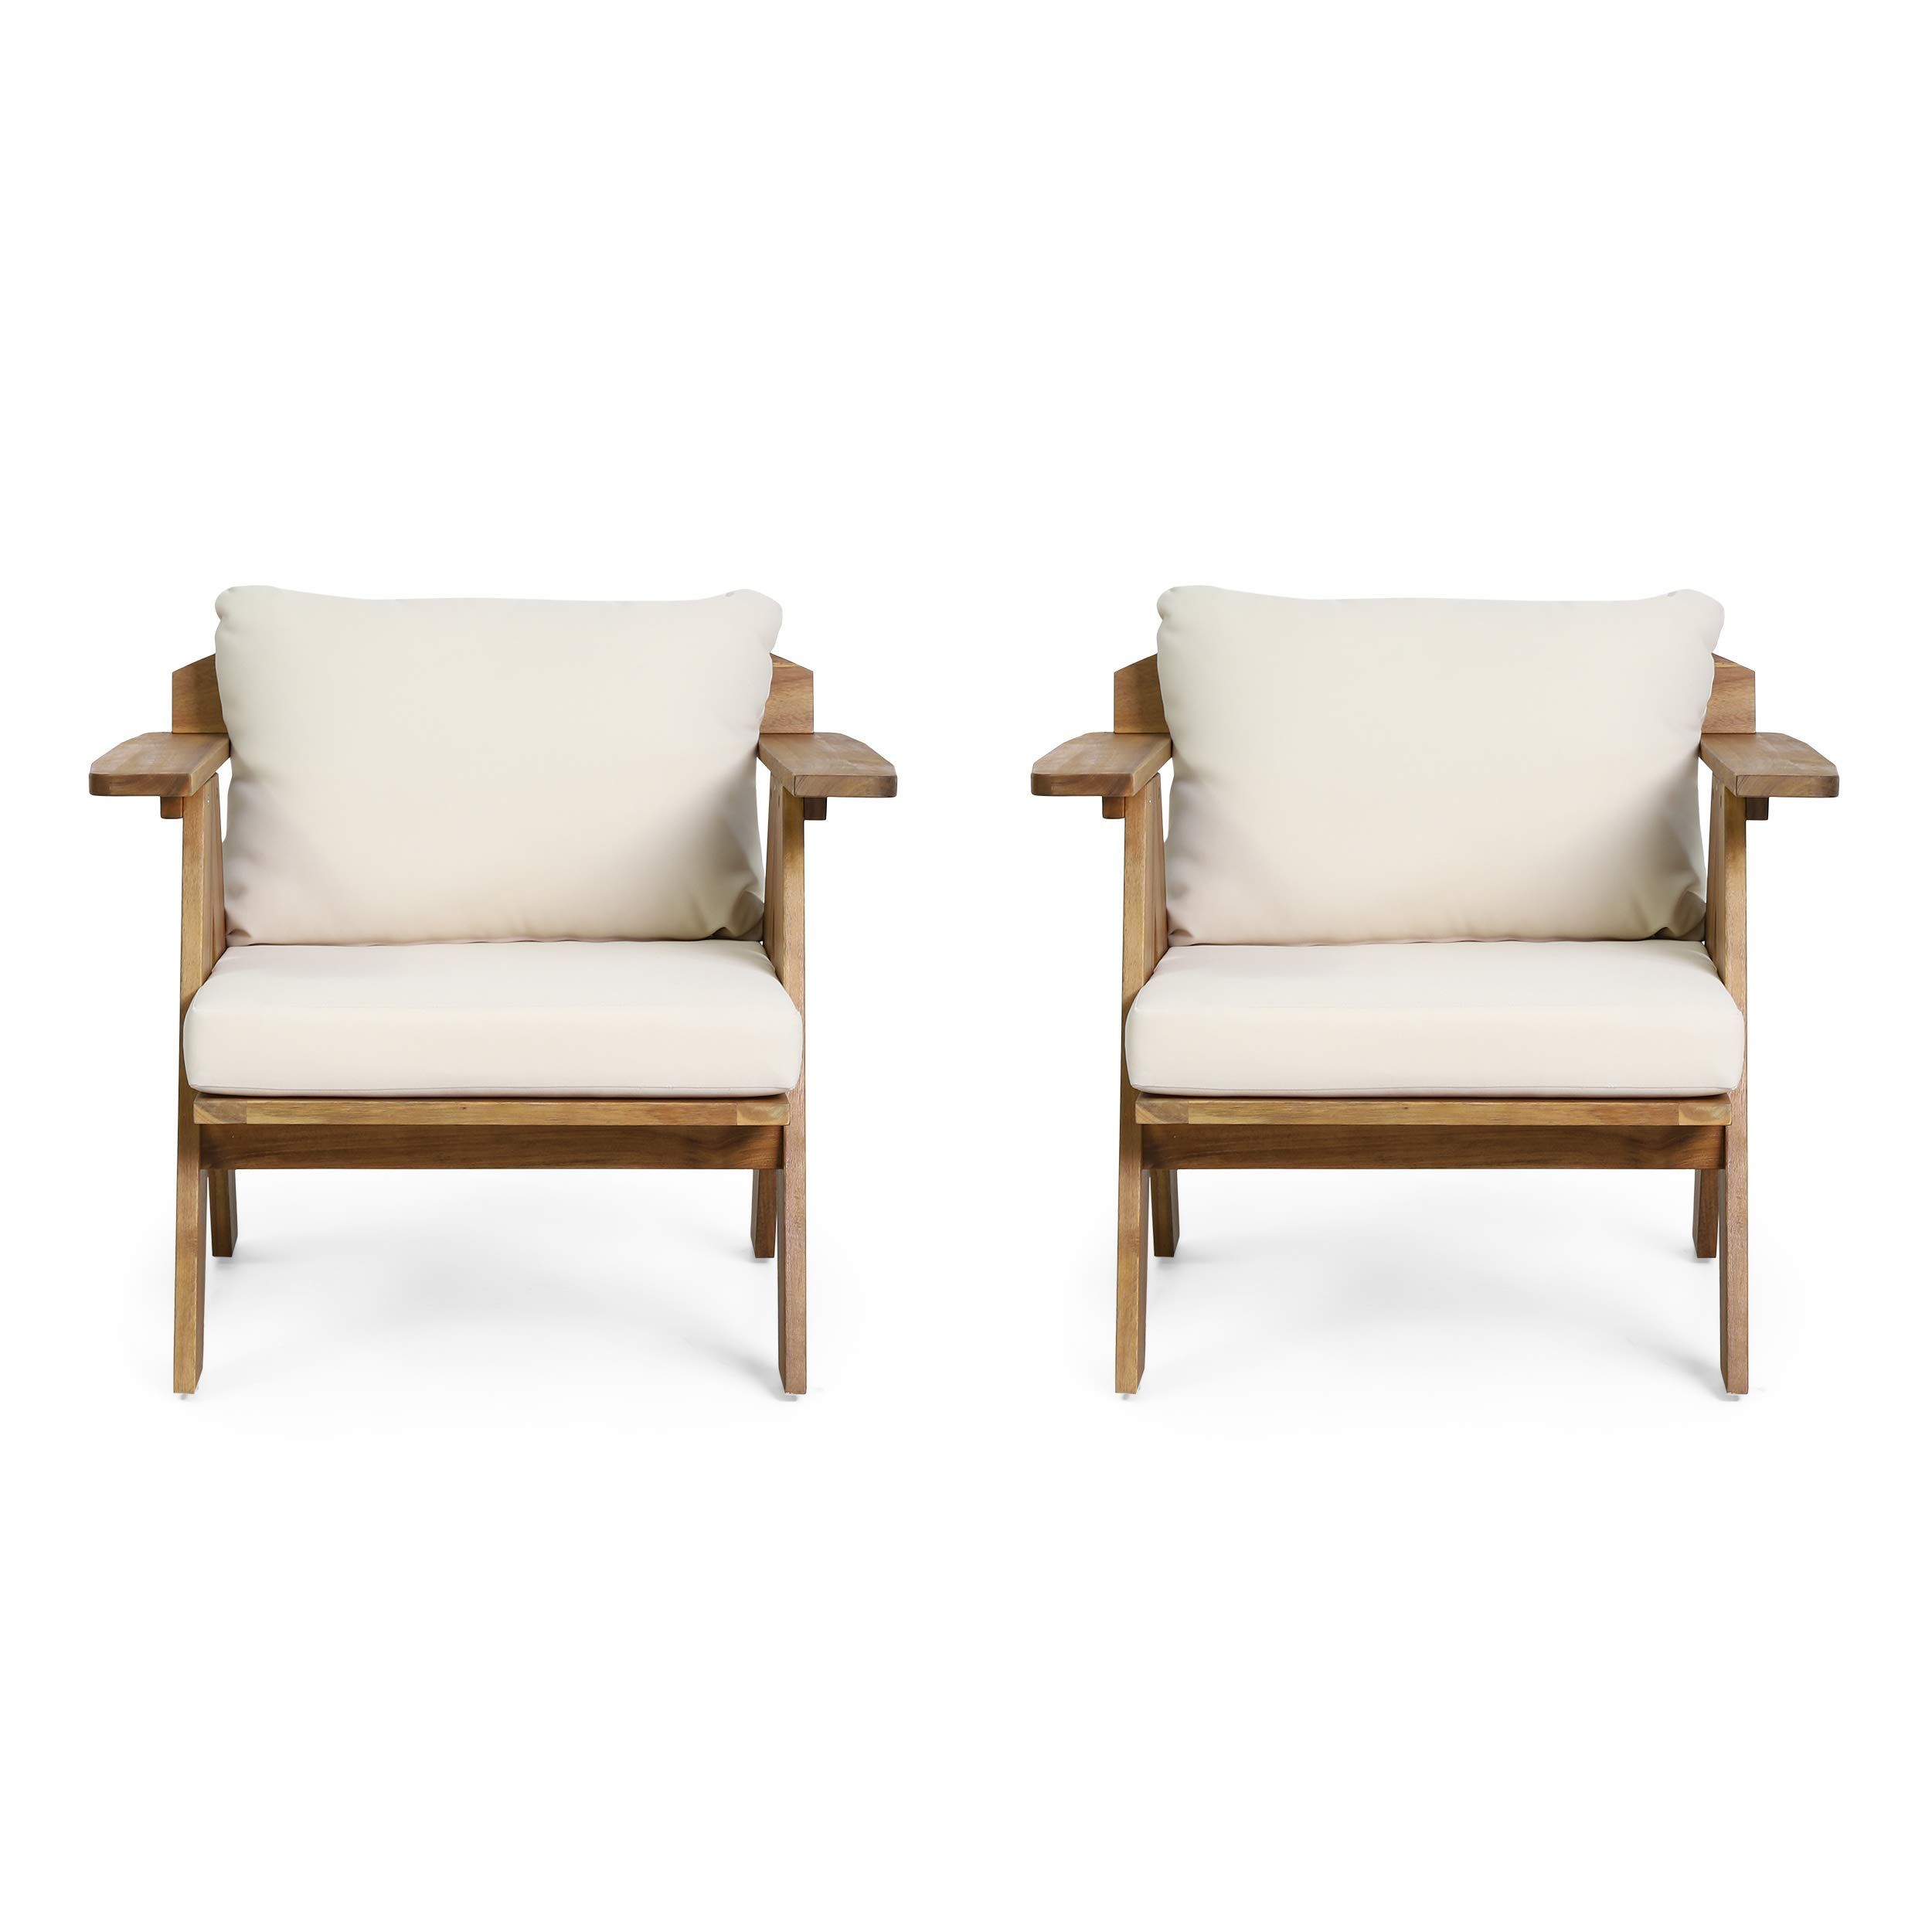 Christopher Knight Home Arcola Outdoor Club Chair with Cushion - Acacia Wood - Teak/Beige (Set of 2) | Amazon (US)